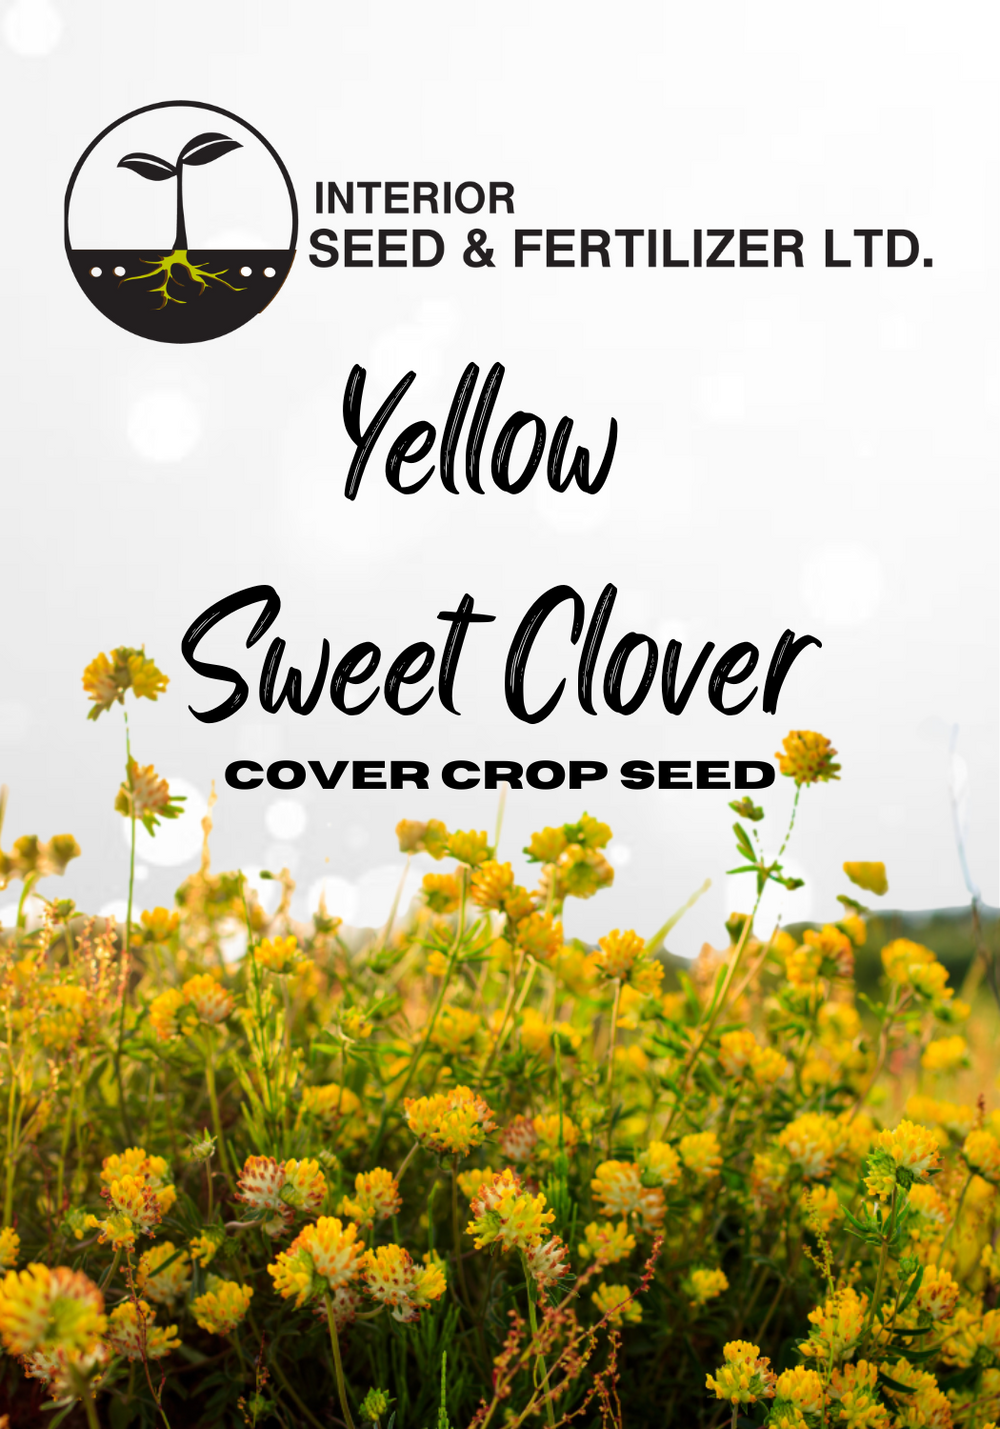 Boost your soil's health with our Yellow Sweet Clover cover crop seeds. From Interior Seed and Fertilizer Garden Center located near Wycliff, in Cranbrook BC. .